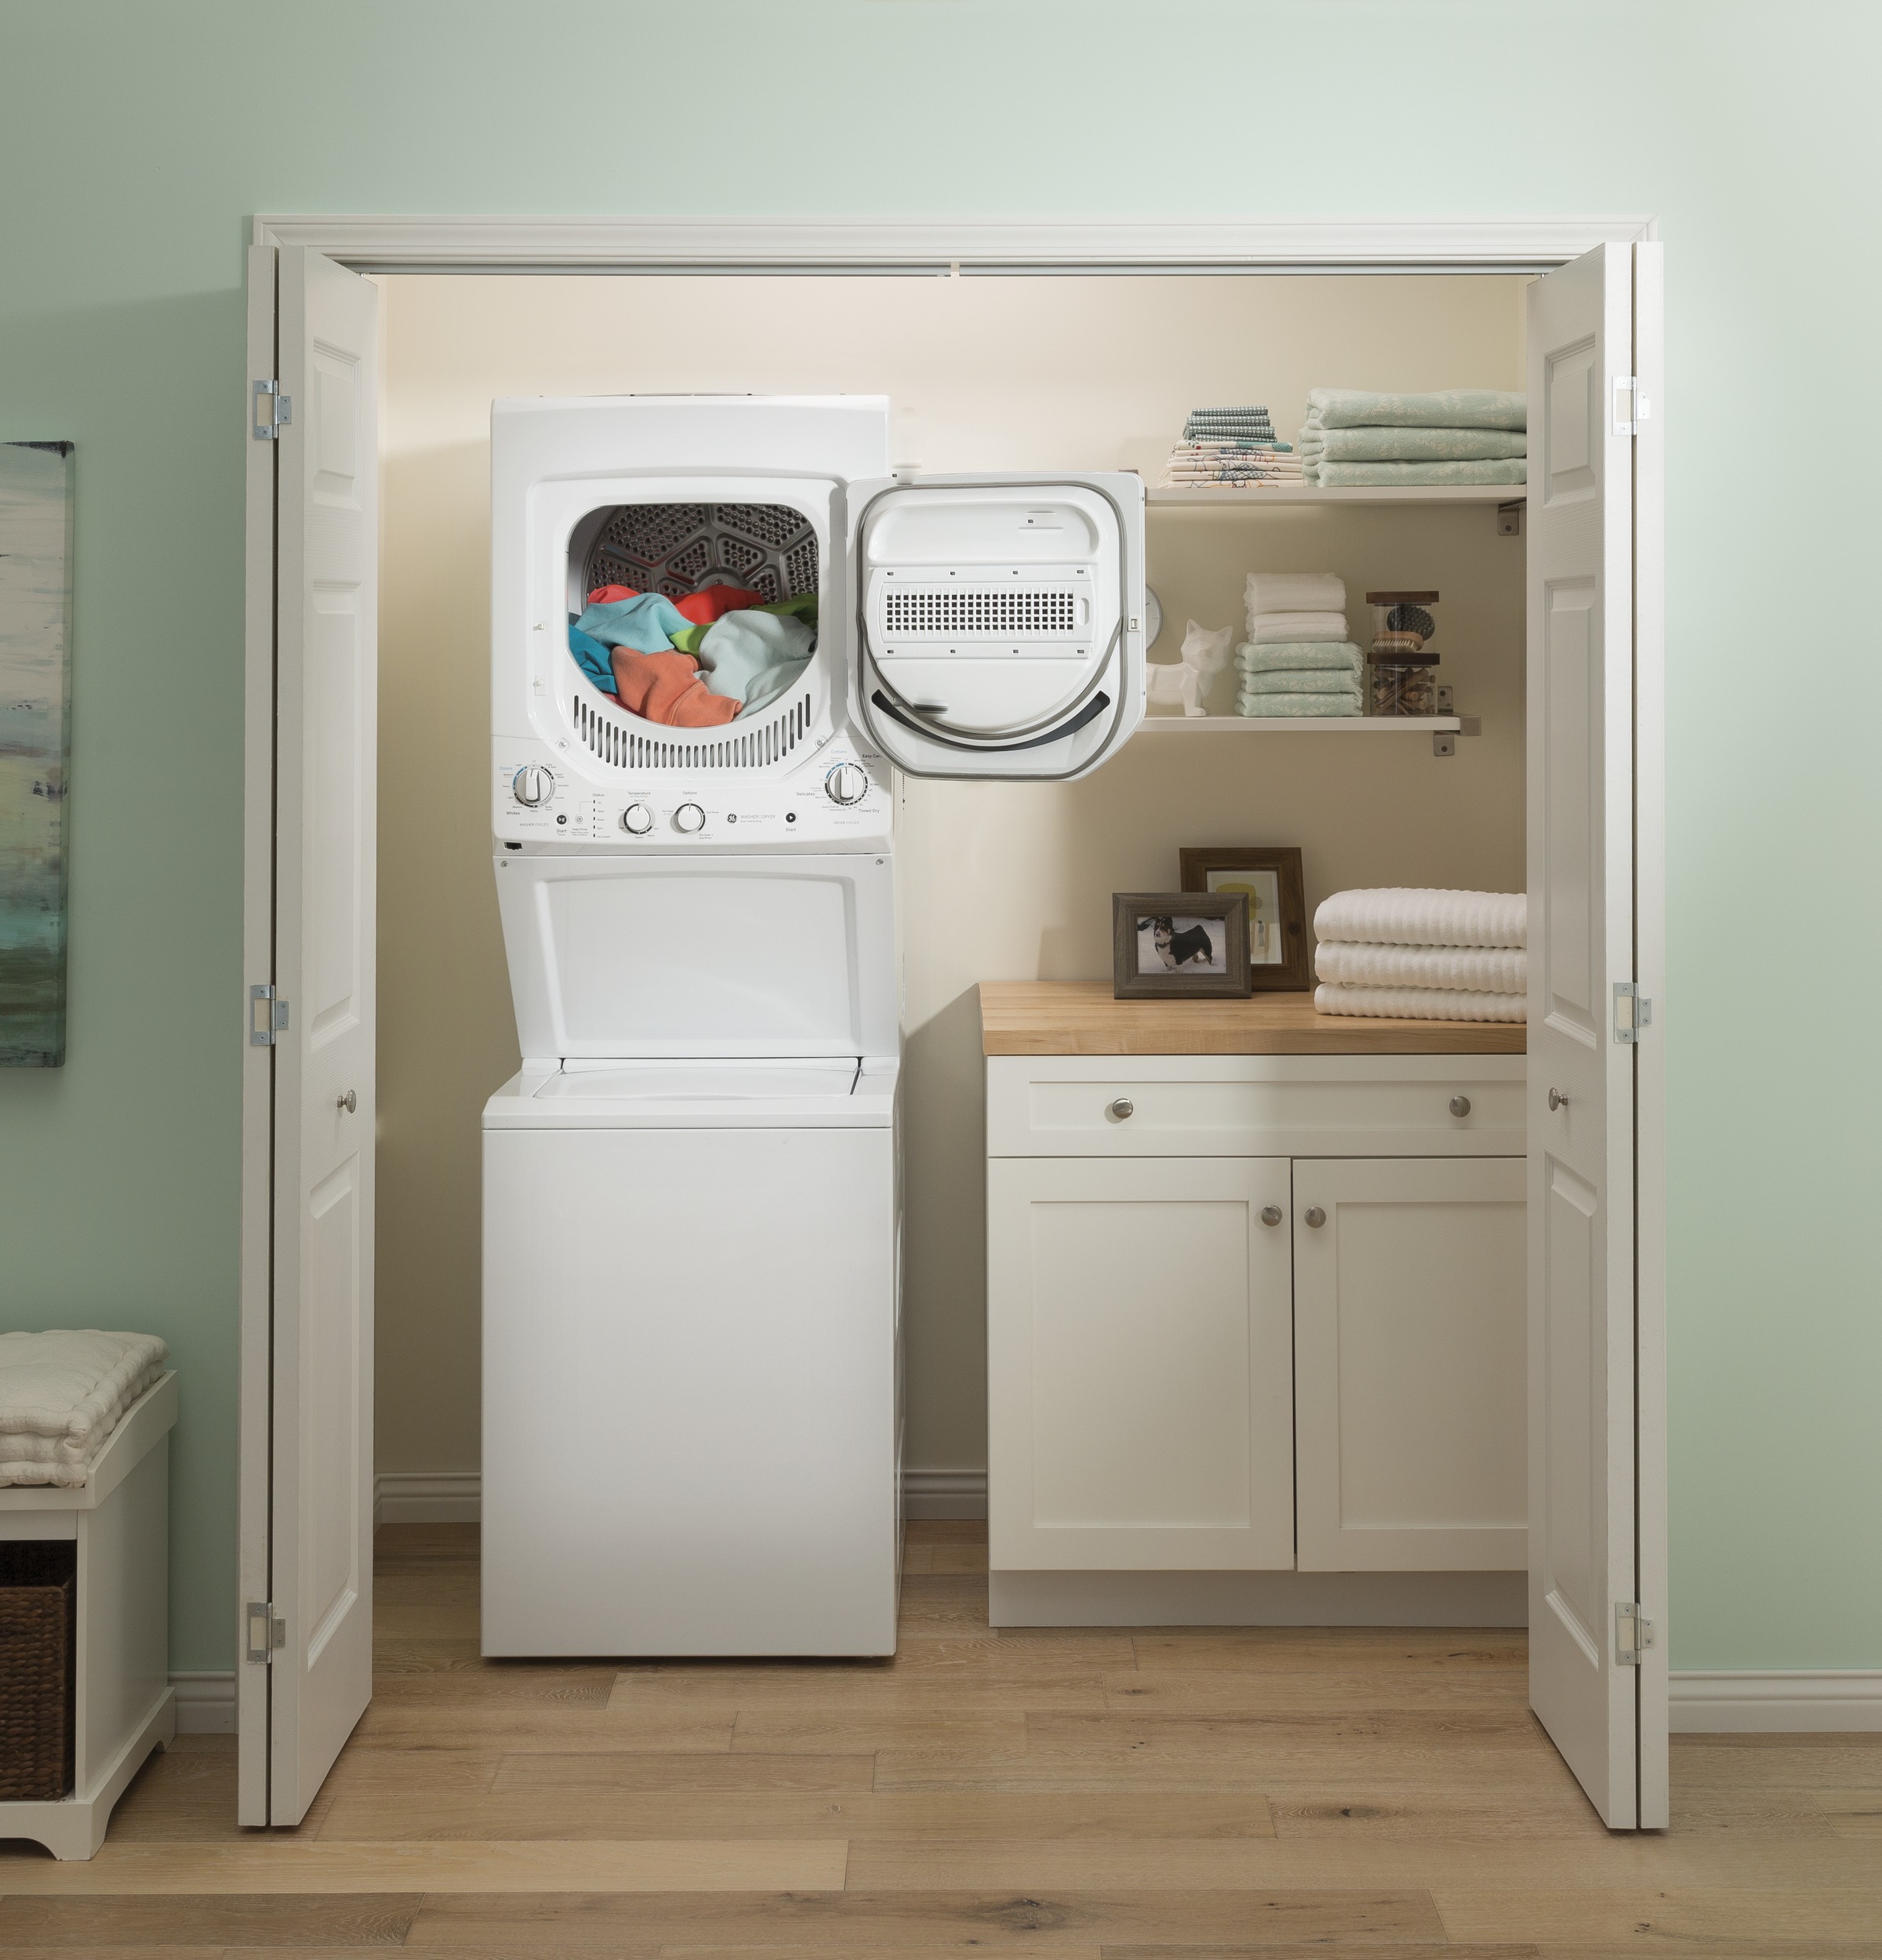 Model: GUD24ESSMWW | GE GE Unitized Spacemaker® 2.3 cu. ft. Capacity Washer with Stainless Steel Basket and 4.4 cu. ft. Capacity Electric Dryer